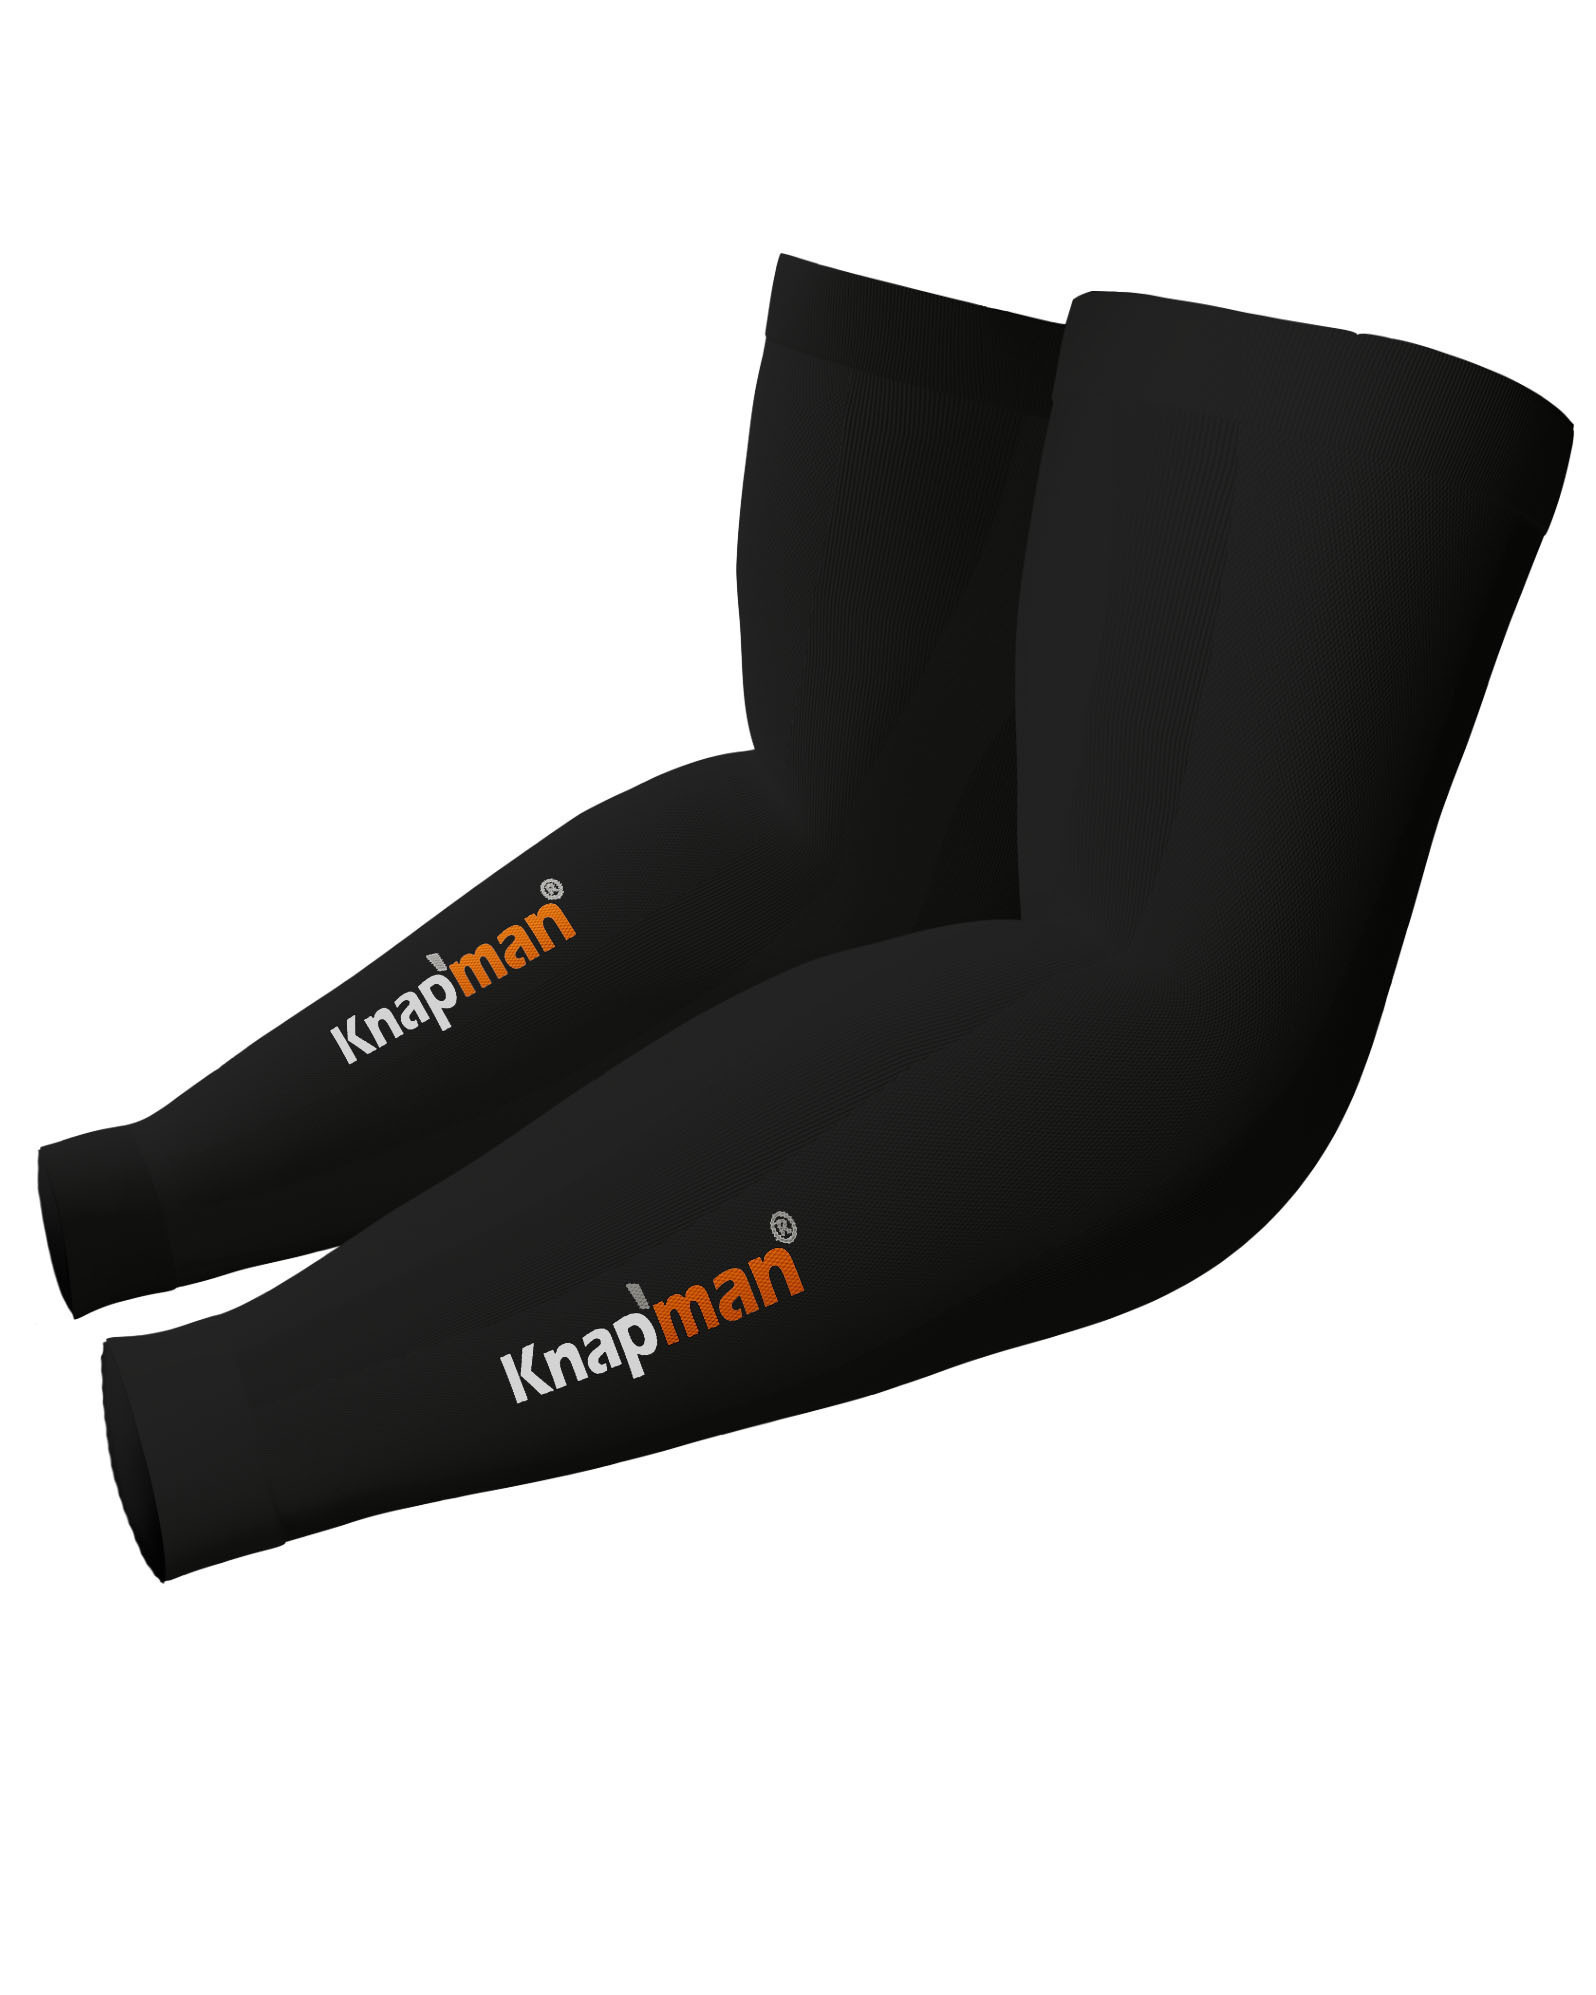 Knapman Zoned Compression Arm Sleeves 45% black